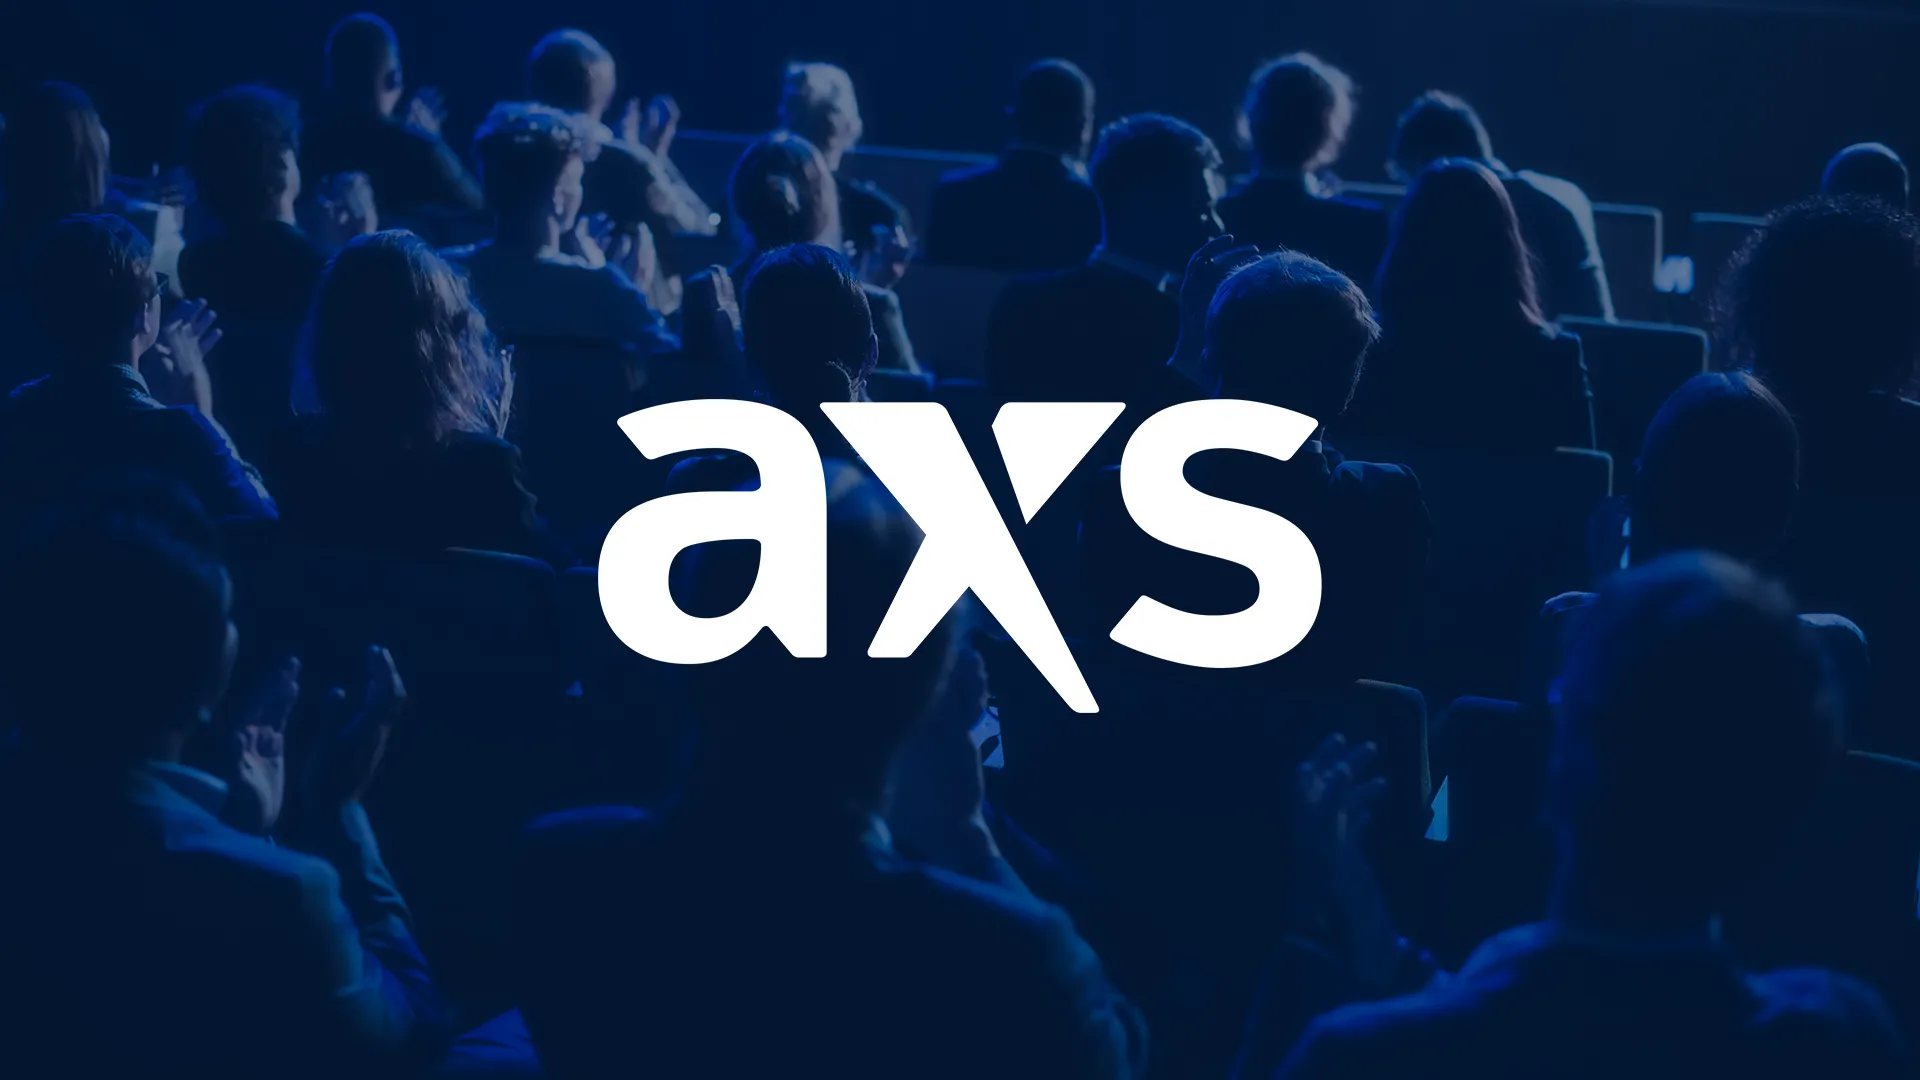 AXS logo over conference attendee background photo